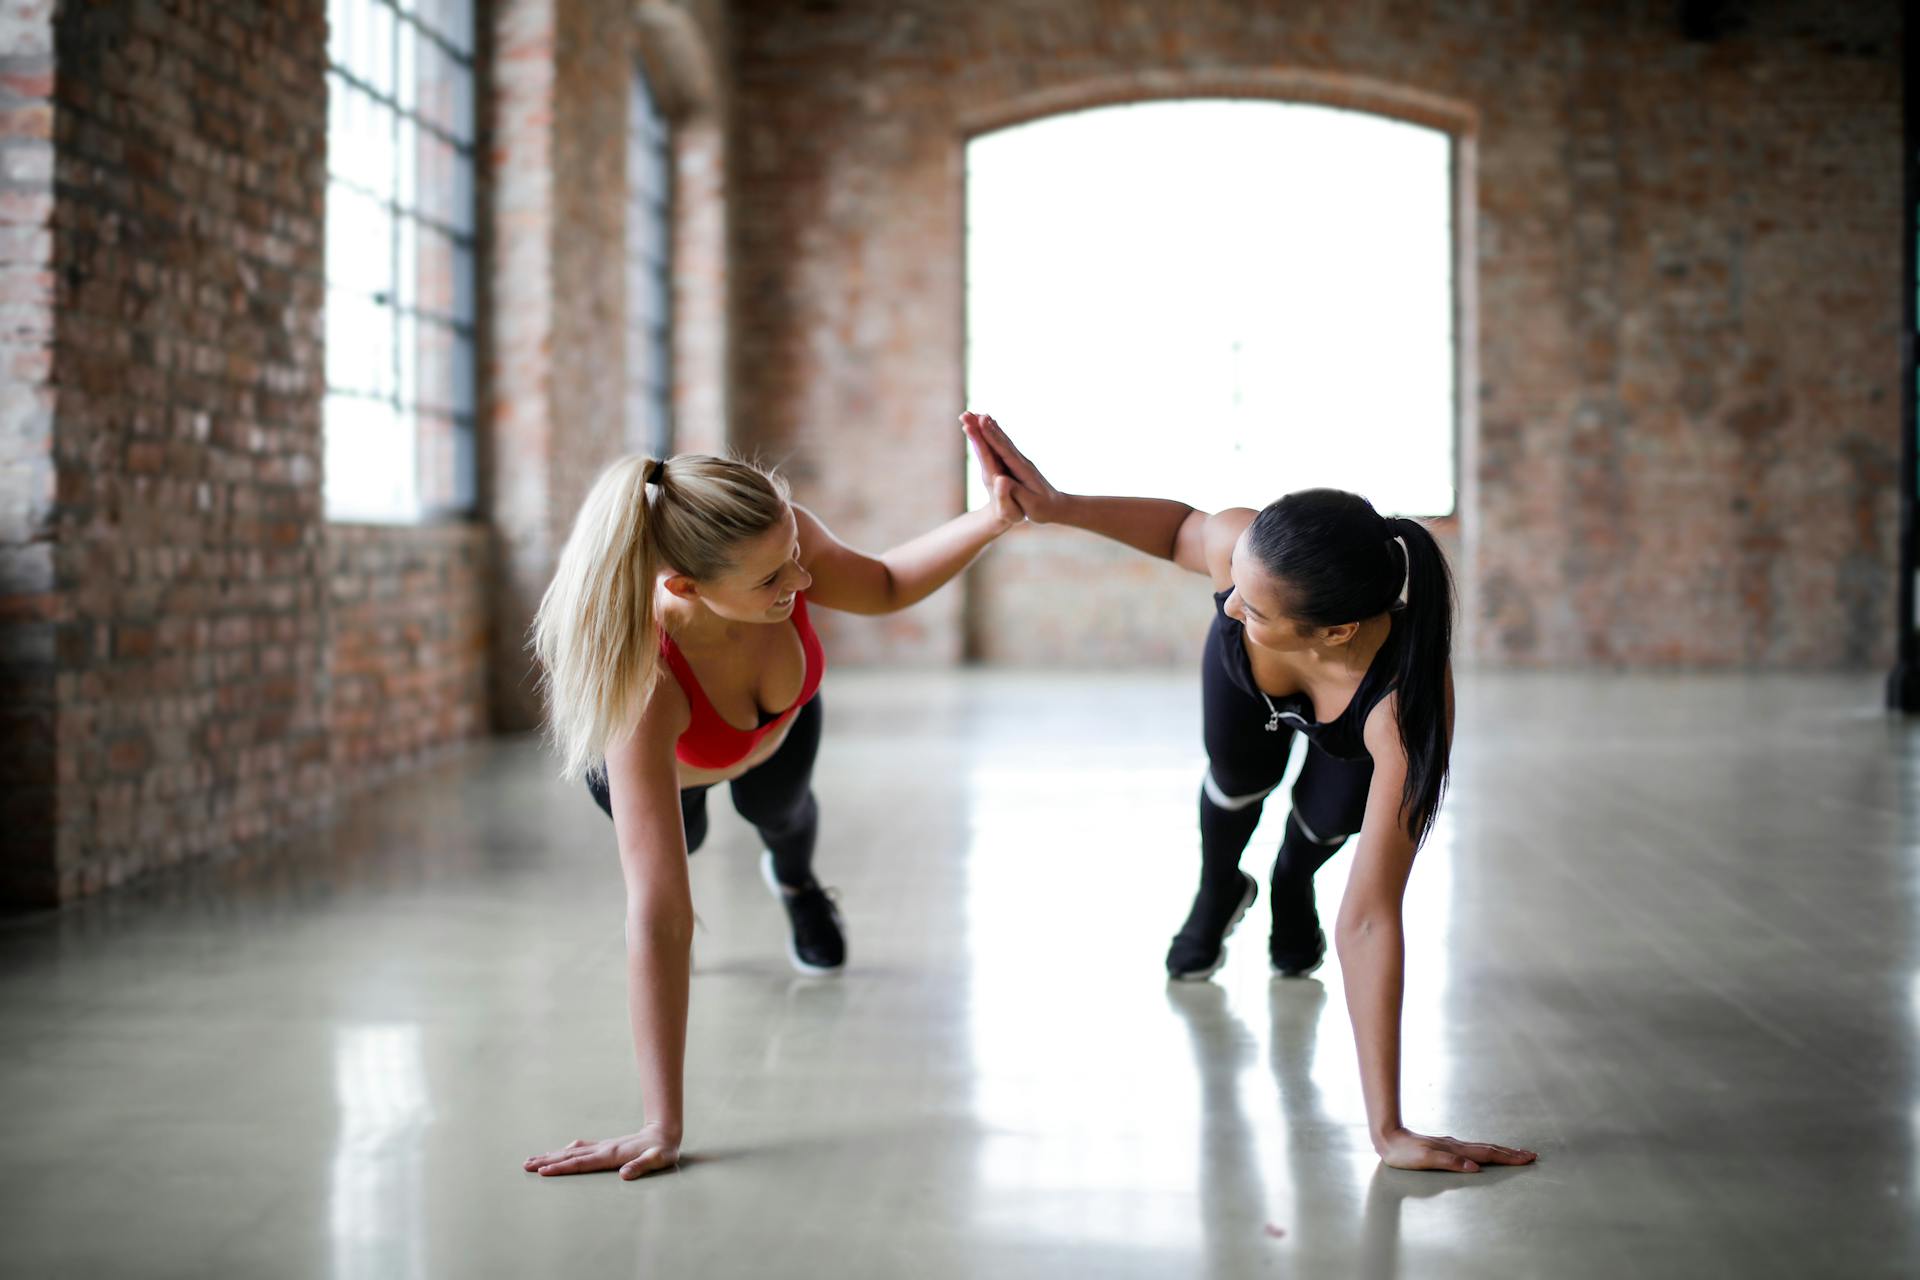 Two women doing a high-five while working out together | Source: Pexels